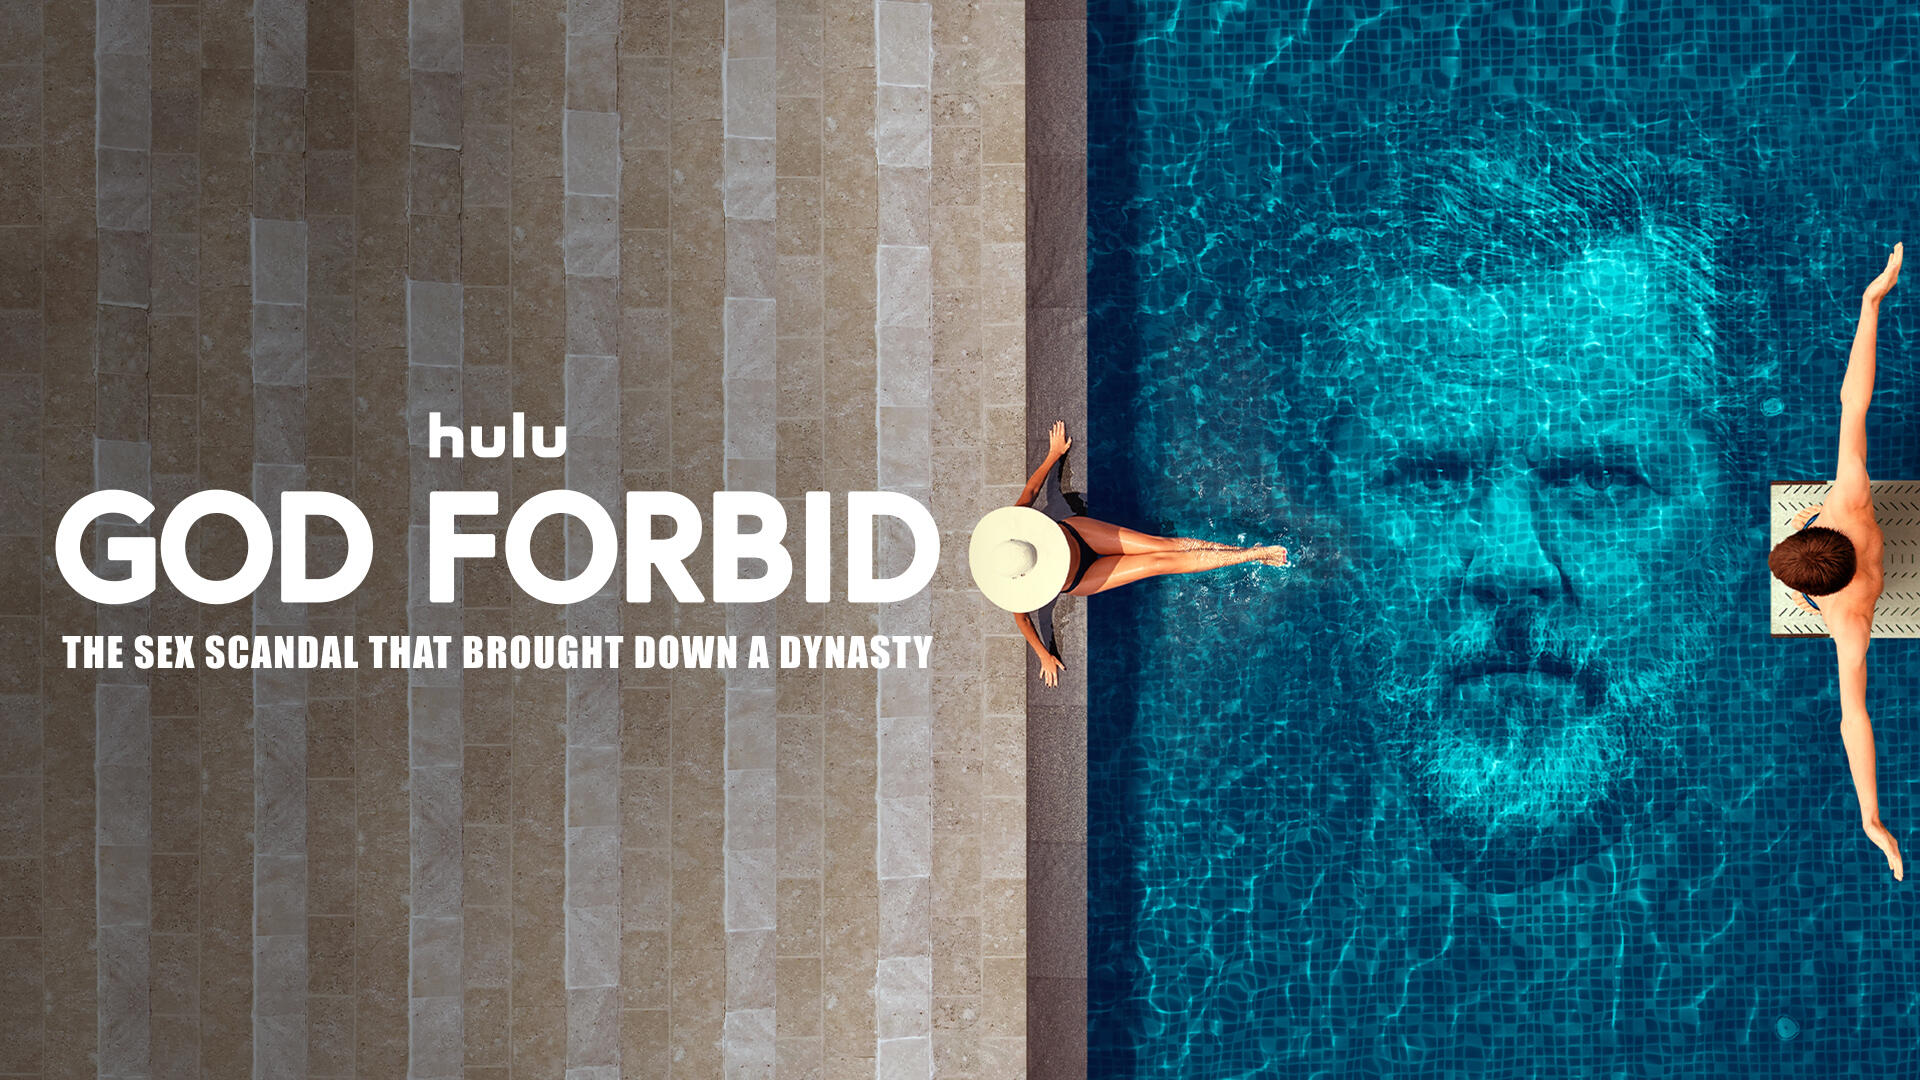 God Forbid: The Sex Scandal That Brought Down A Dynasty -- In this revealing documentary, Giancarlo Granda, former pool attendant at the Fontainebleau Hotel, shares the intimate details of his 7-year relationship with a charming older woman, Becki Falwell, and her husband, the Evangelical Trump stalwart Jerry Falwell Jr. Directed by Billy Corben, GOD FORBID: THE SEX SCANDAL THAT BROUGHT DOWN A DYNASTY outlines Granda’s entanglement with the Falwell’s seemingly perfect lives and the overarching influence this affair had on a presidential election. GOD FORBID is executive produced by Corben and Alfred Spellman for Rakontur and Adam McKay and Todd Schulman of HyperObject. (Courtesy of Hulu)